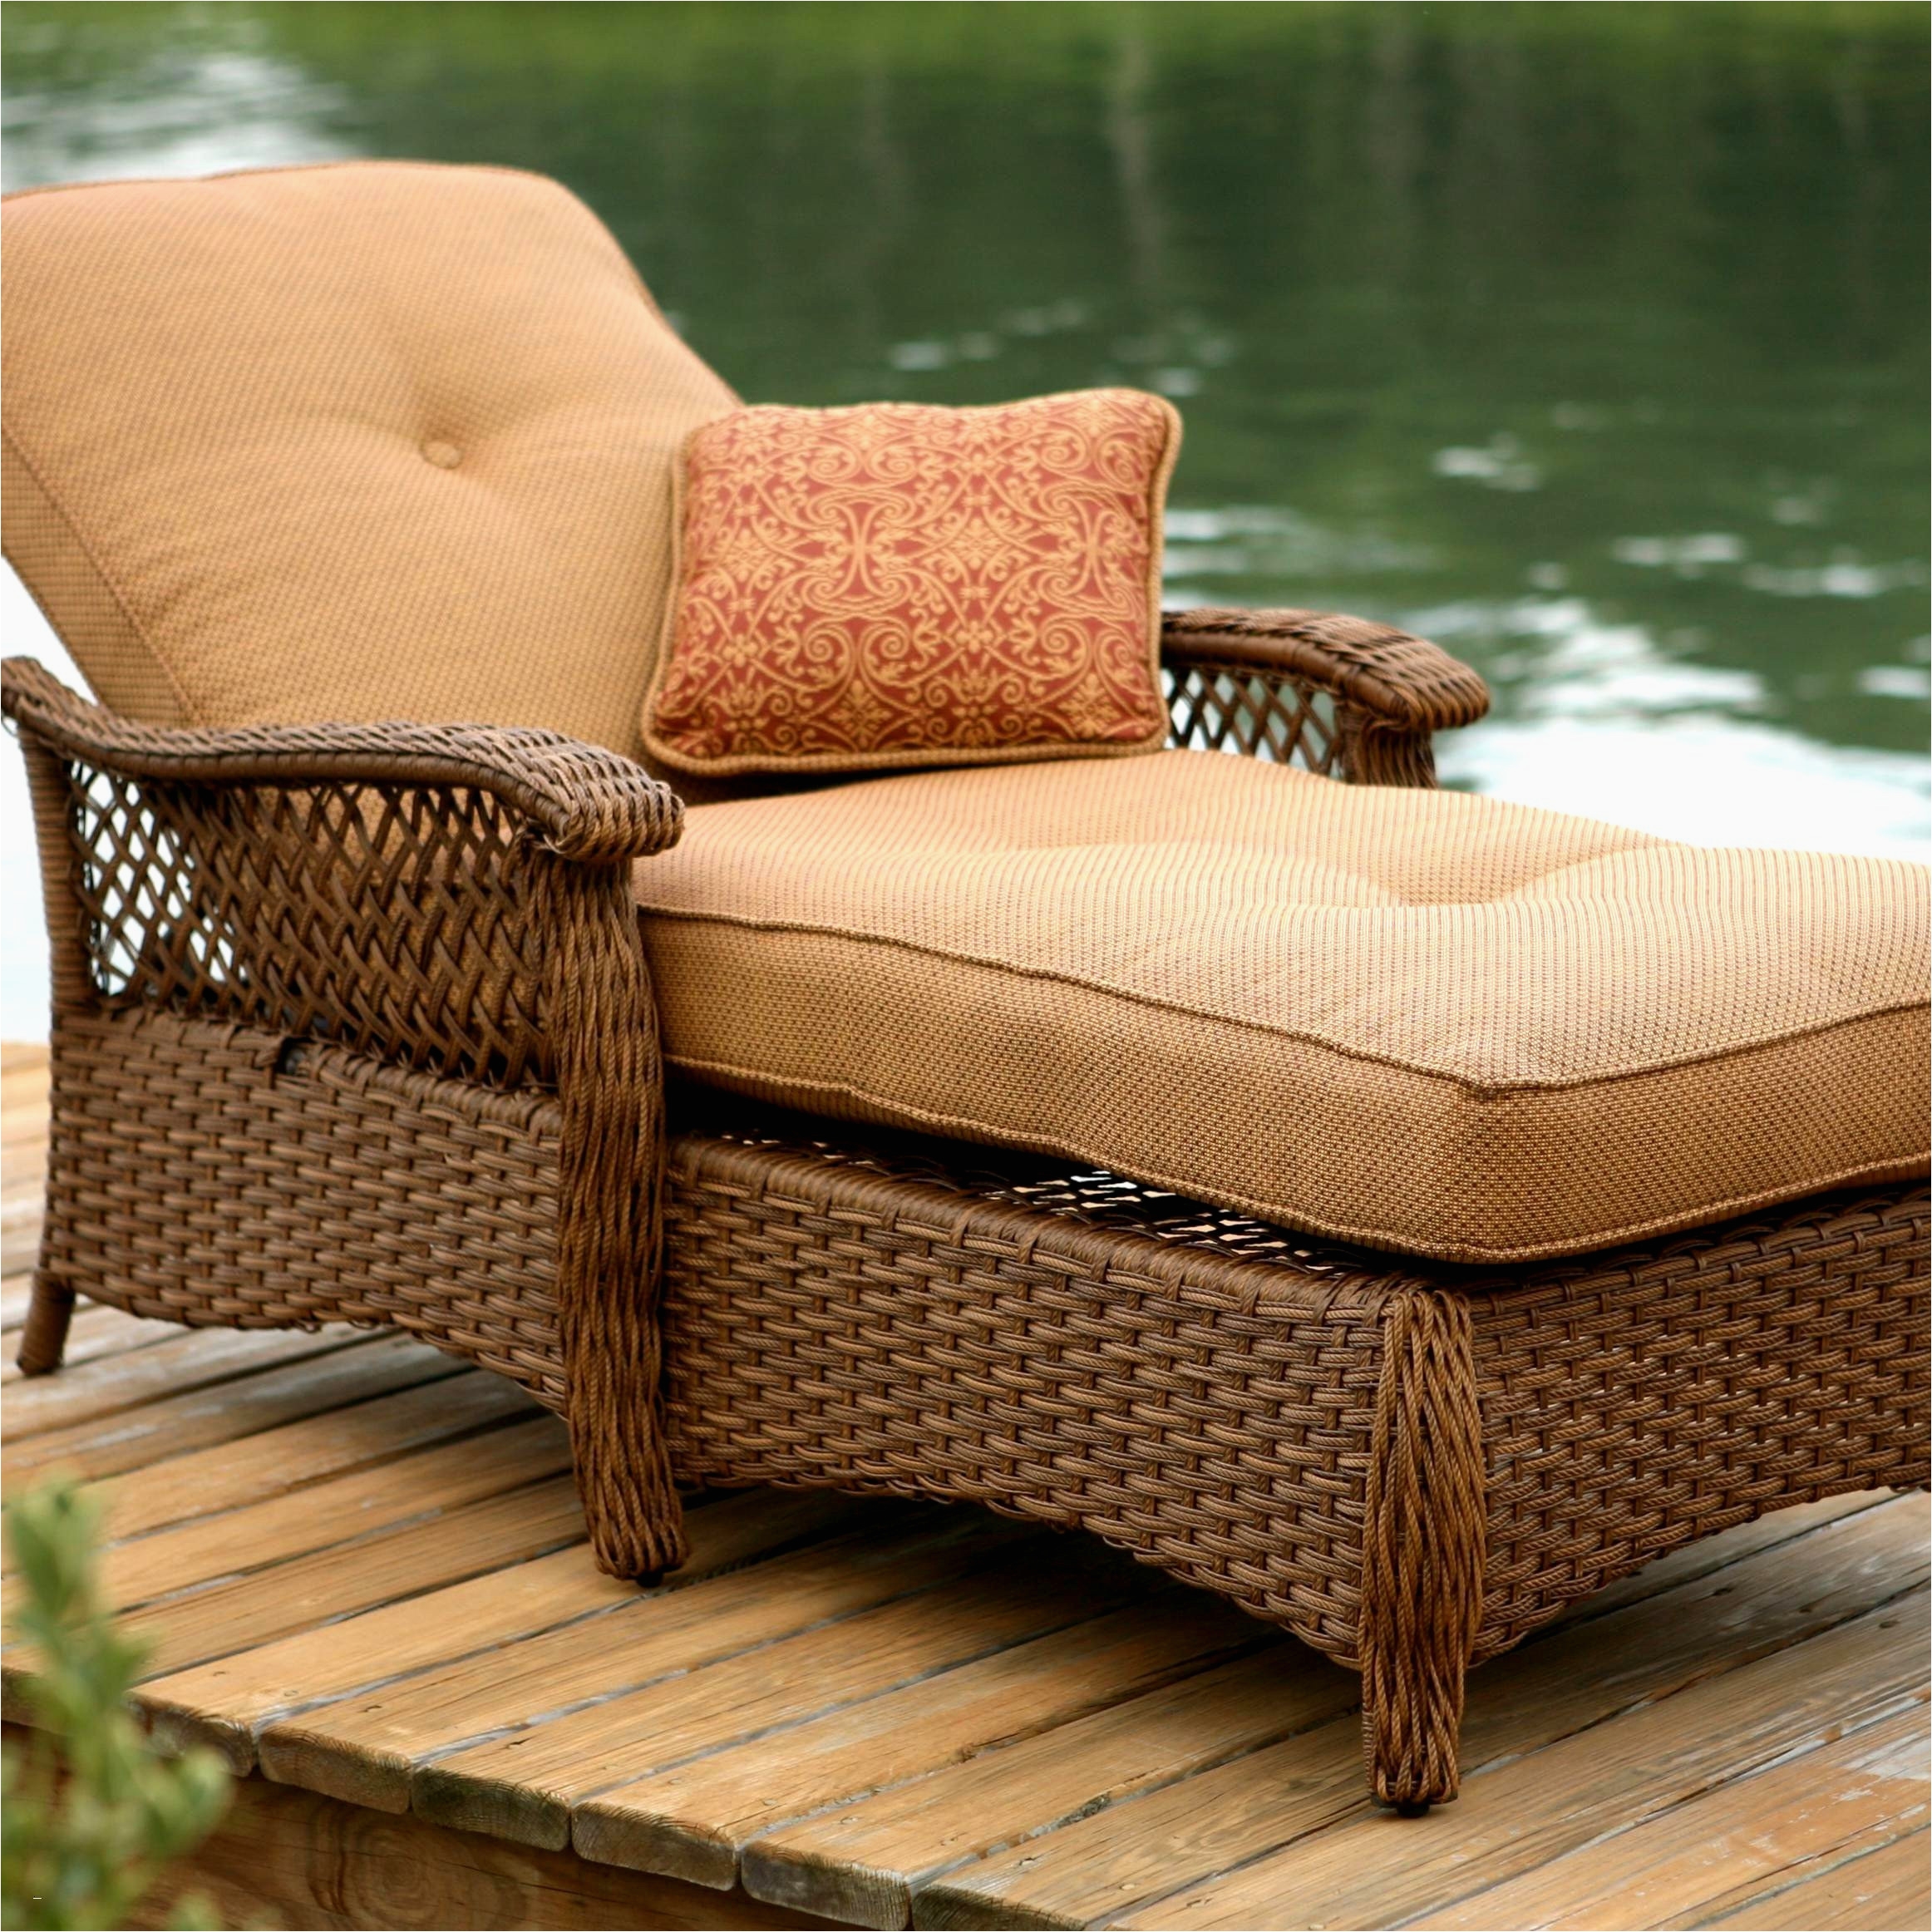 end of season patio furniture sale fresh designer outdoor furniture luxury exciting wicker outdoor sofa 0d